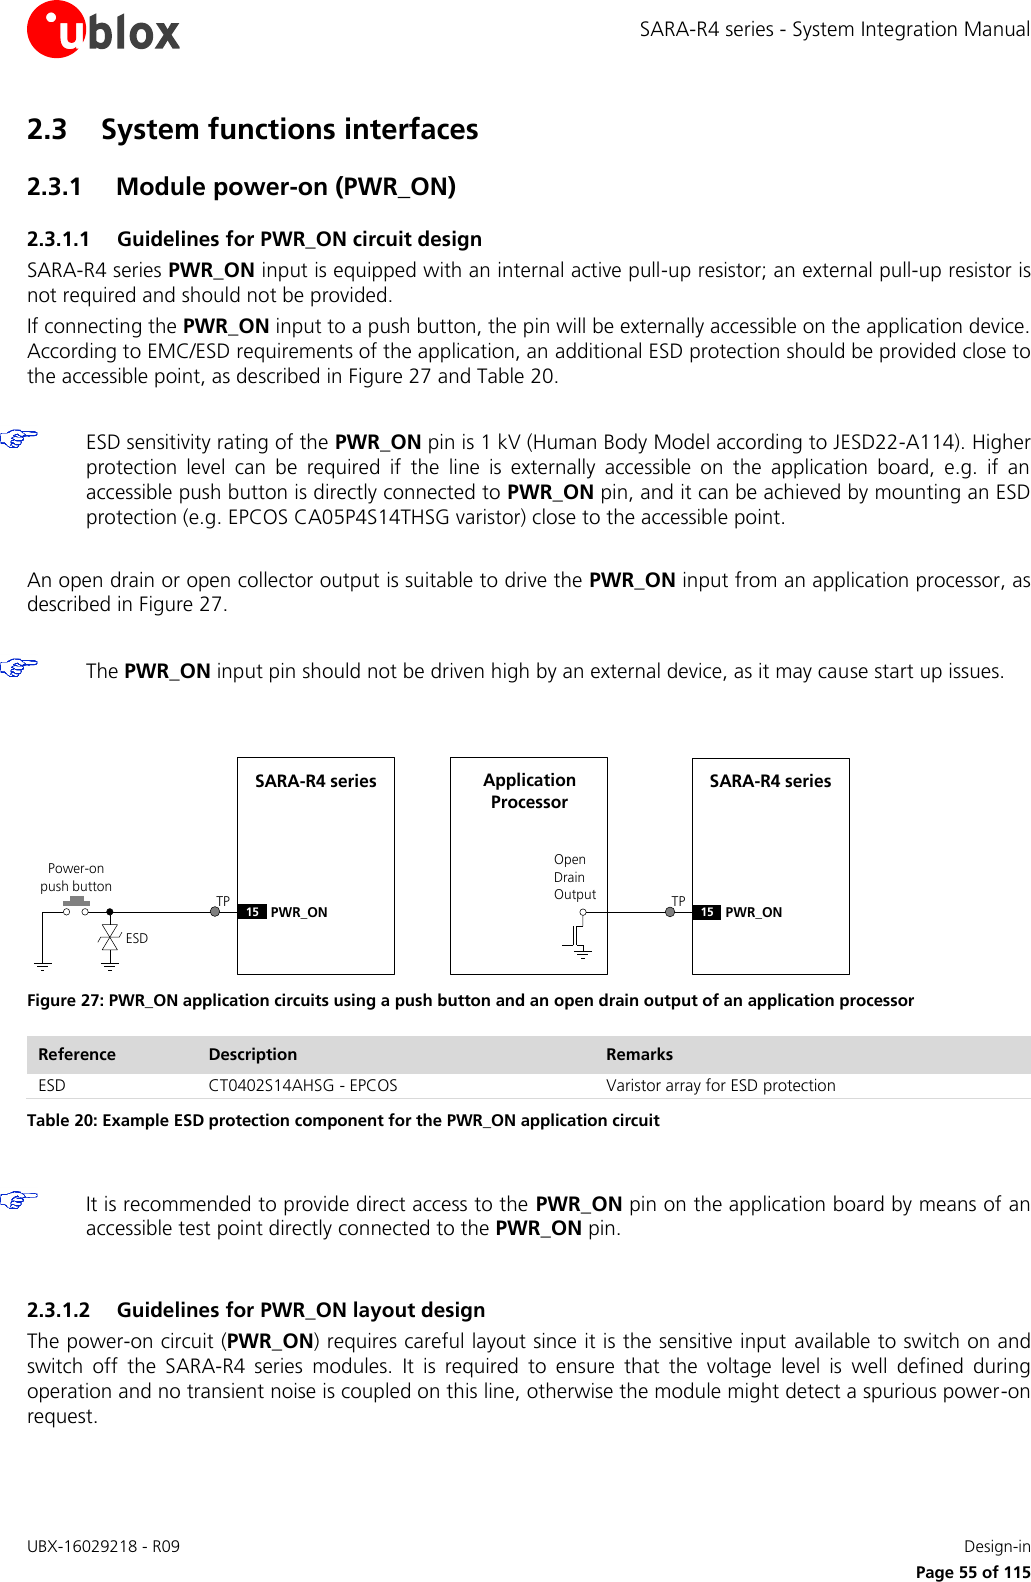 SARA-R4 series - System Integration Manual UBX-16029218 - R09    Design-in     Page 55 of 115 2.3 System functions interfaces 2.3.1 Module power-on (PWR_ON) 2.3.1.1 Guidelines for PWR_ON circuit design SARA-R4 series PWR_ON input is equipped with an internal active pull-up resistor; an external pull-up resistor is not required and should not be provided.  If connecting the PWR_ON input to a push button, the pin will be externally accessible on the application device. According to EMC/ESD requirements of the application, an additional ESD protection should be provided close to the accessible point, as described in Figure 27 and Table 20.   ESD sensitivity rating of the PWR_ON pin is 1 kV (Human Body Model according to JESD22-A114). Higher protection  level  can  be  required  if  the  line  is  externally  accessible  on  the  application  board,  e.g.  if  an accessible push button is directly connected to PWR_ON pin, and it can be achieved by mounting an ESD protection (e.g. EPCOS CA05P4S14THSG varistor) close to the accessible point.  An open drain or open collector output is suitable to drive the PWR_ON input from an application processor, as described in Figure 27.    The PWR_ON input pin should not be driven high by an external device, as it may cause start up issues.   SARA-R4 series15 PWR_ONPower-on push buttonESDOpen Drain OutputApplication ProcessorSARA-R4 series15 PWR_ONTP TP Figure 27: PWR_ON application circuits using a push button and an open drain output of an application processor Reference Description Remarks ESD CT0402S14AHSG - EPCOS Varistor array for ESD protection Table 20: Example ESD protection component for the PWR_ON application circuit   It is recommended to provide direct access to the PWR_ON pin on the application board by means of an accessible test point directly connected to the PWR_ON pin.  2.3.1.2 Guidelines for PWR_ON layout design The power-on circuit (PWR_ON) requires careful layout since it is the sensitive input available to switch on and switch  off  the  SARA-R4  series  modules.  It  is  required  to  ensure  that  the  voltage  level  is  well  defined  during operation and no transient noise is coupled on this line, otherwise the module might detect a spurious power-on request.  